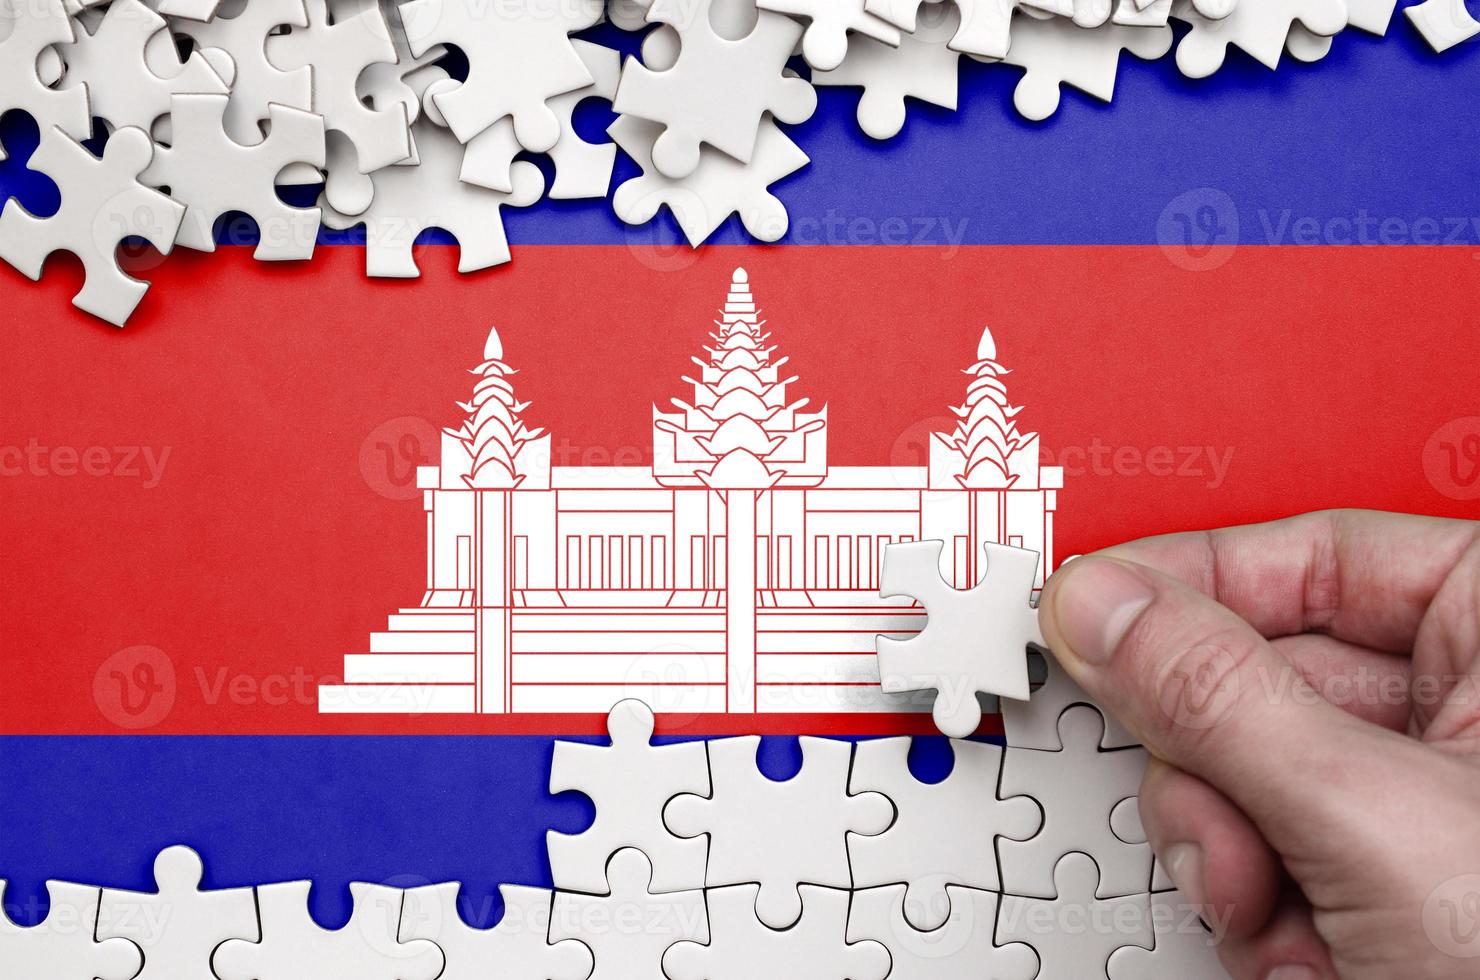 Cambodia flag is depicted on a table on which the human hand folds a puzzle of white color photo